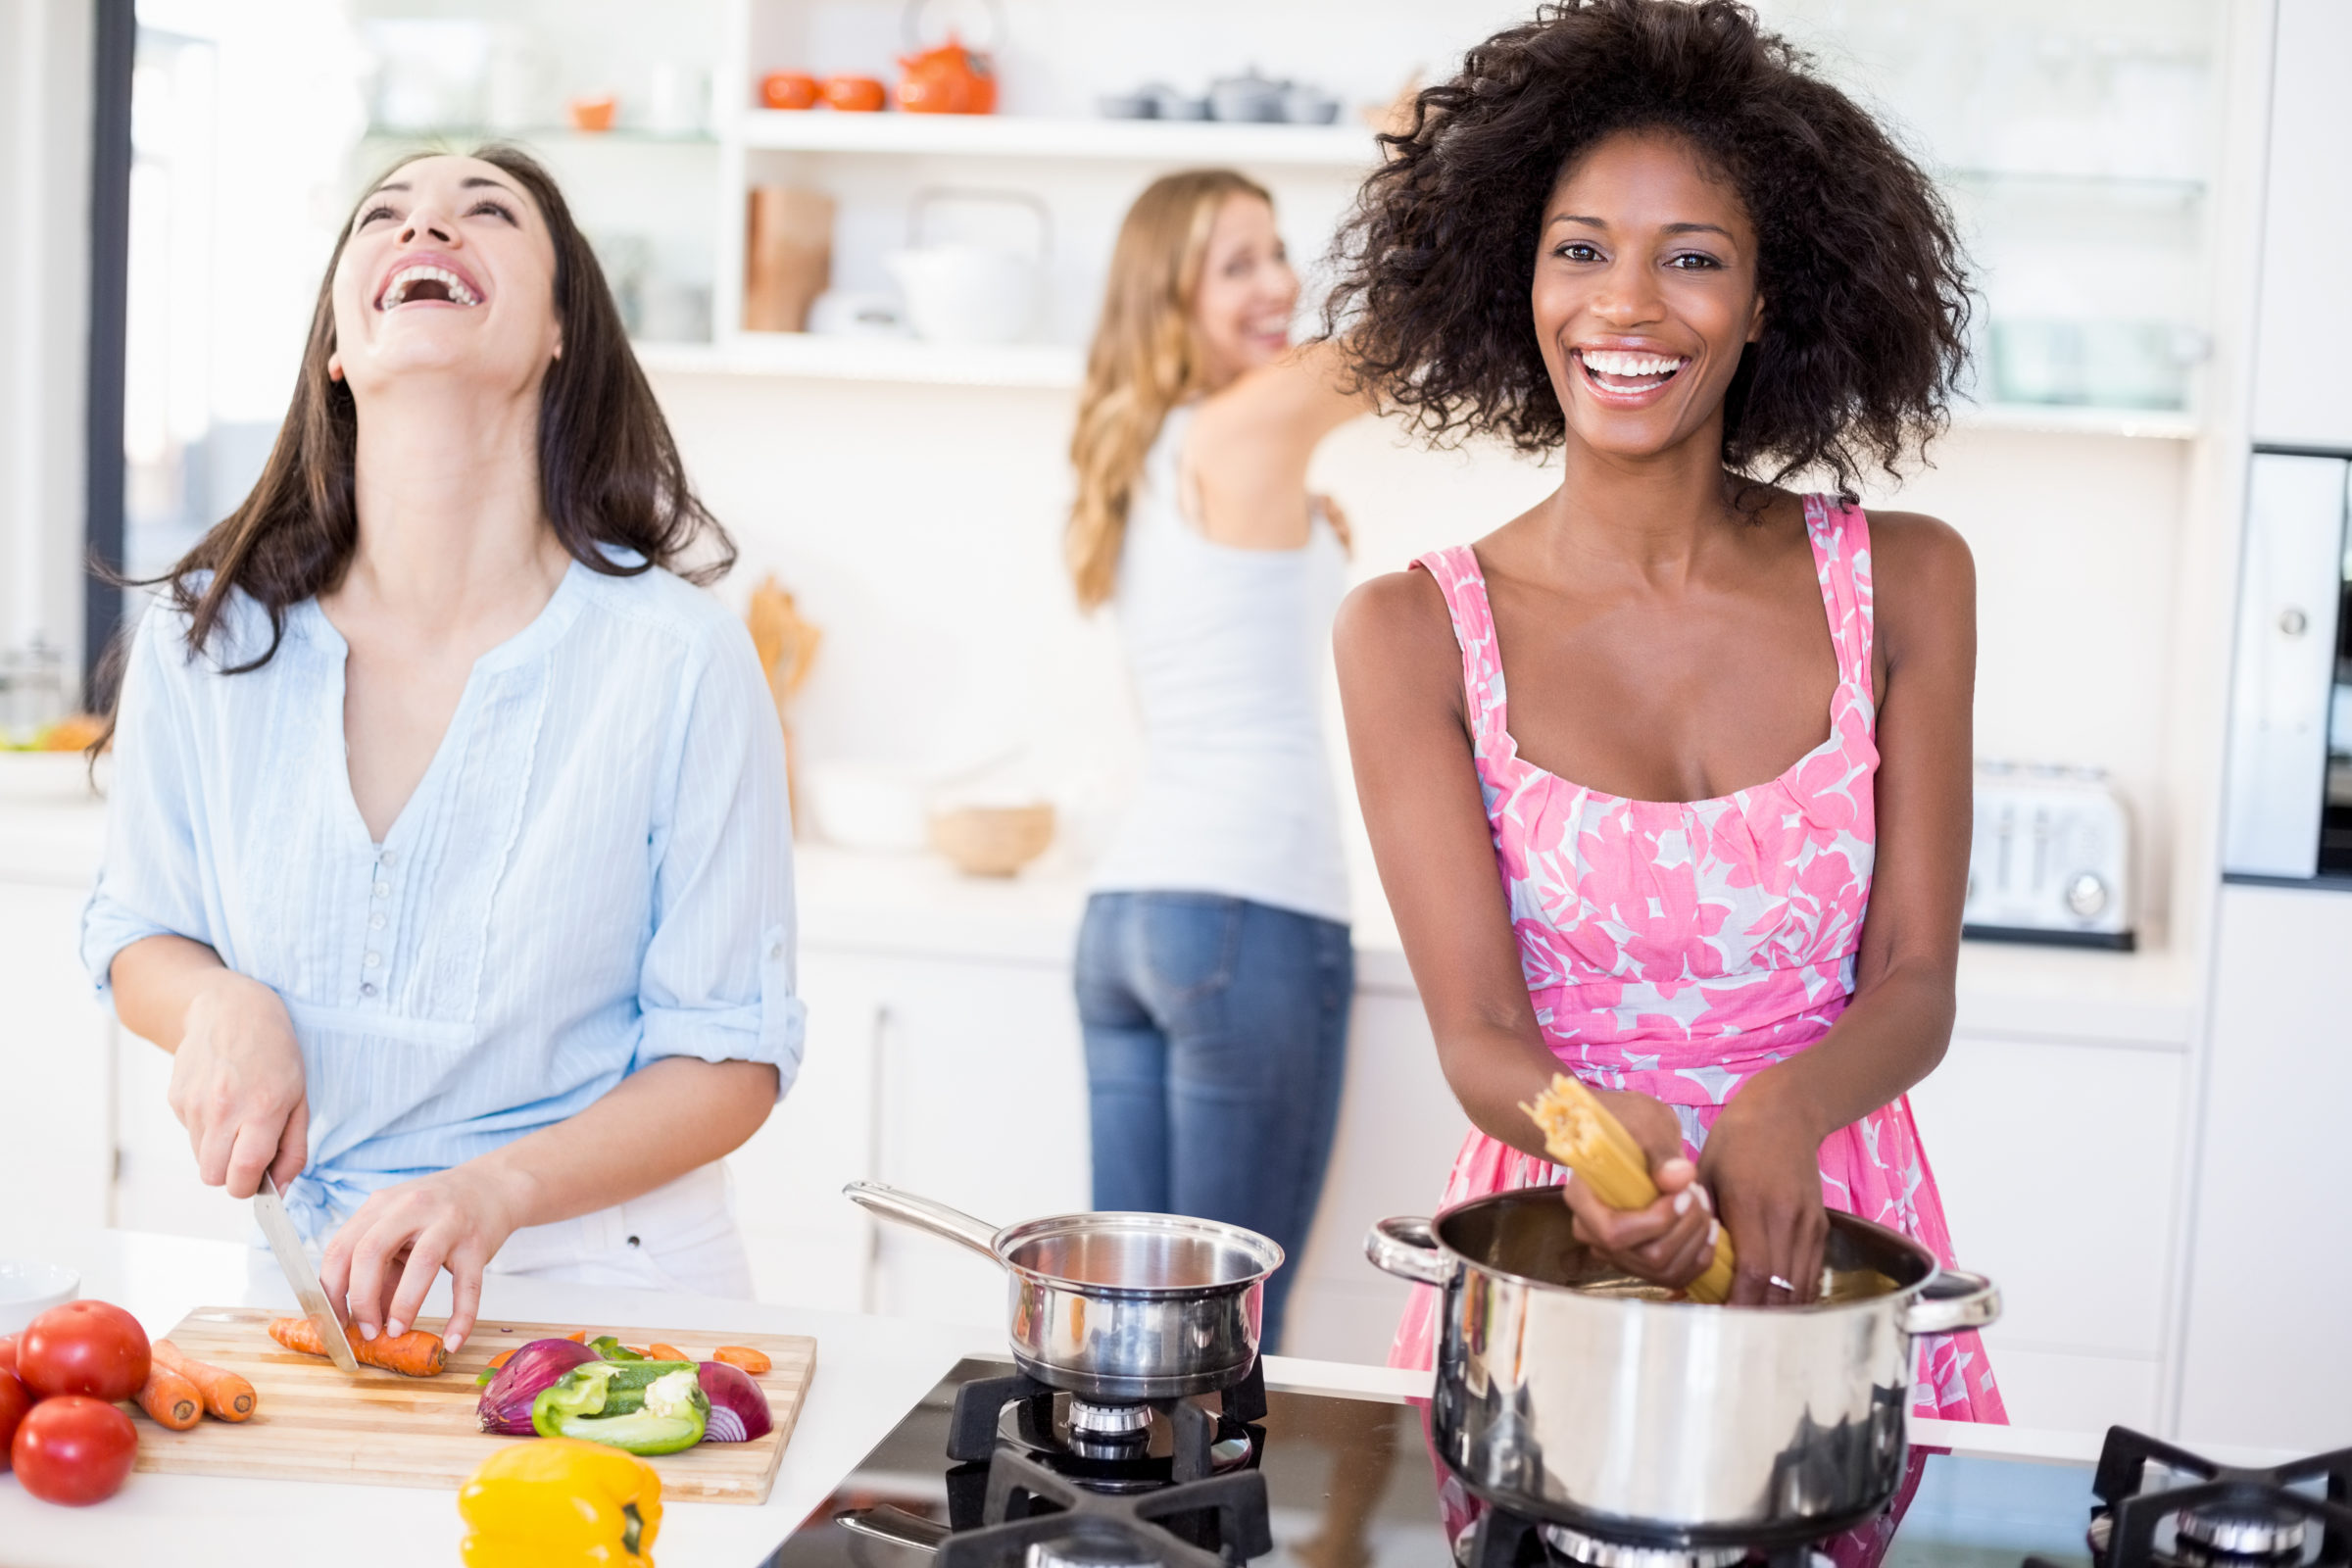 Cooking class as fun activities to do with your bridesmaids